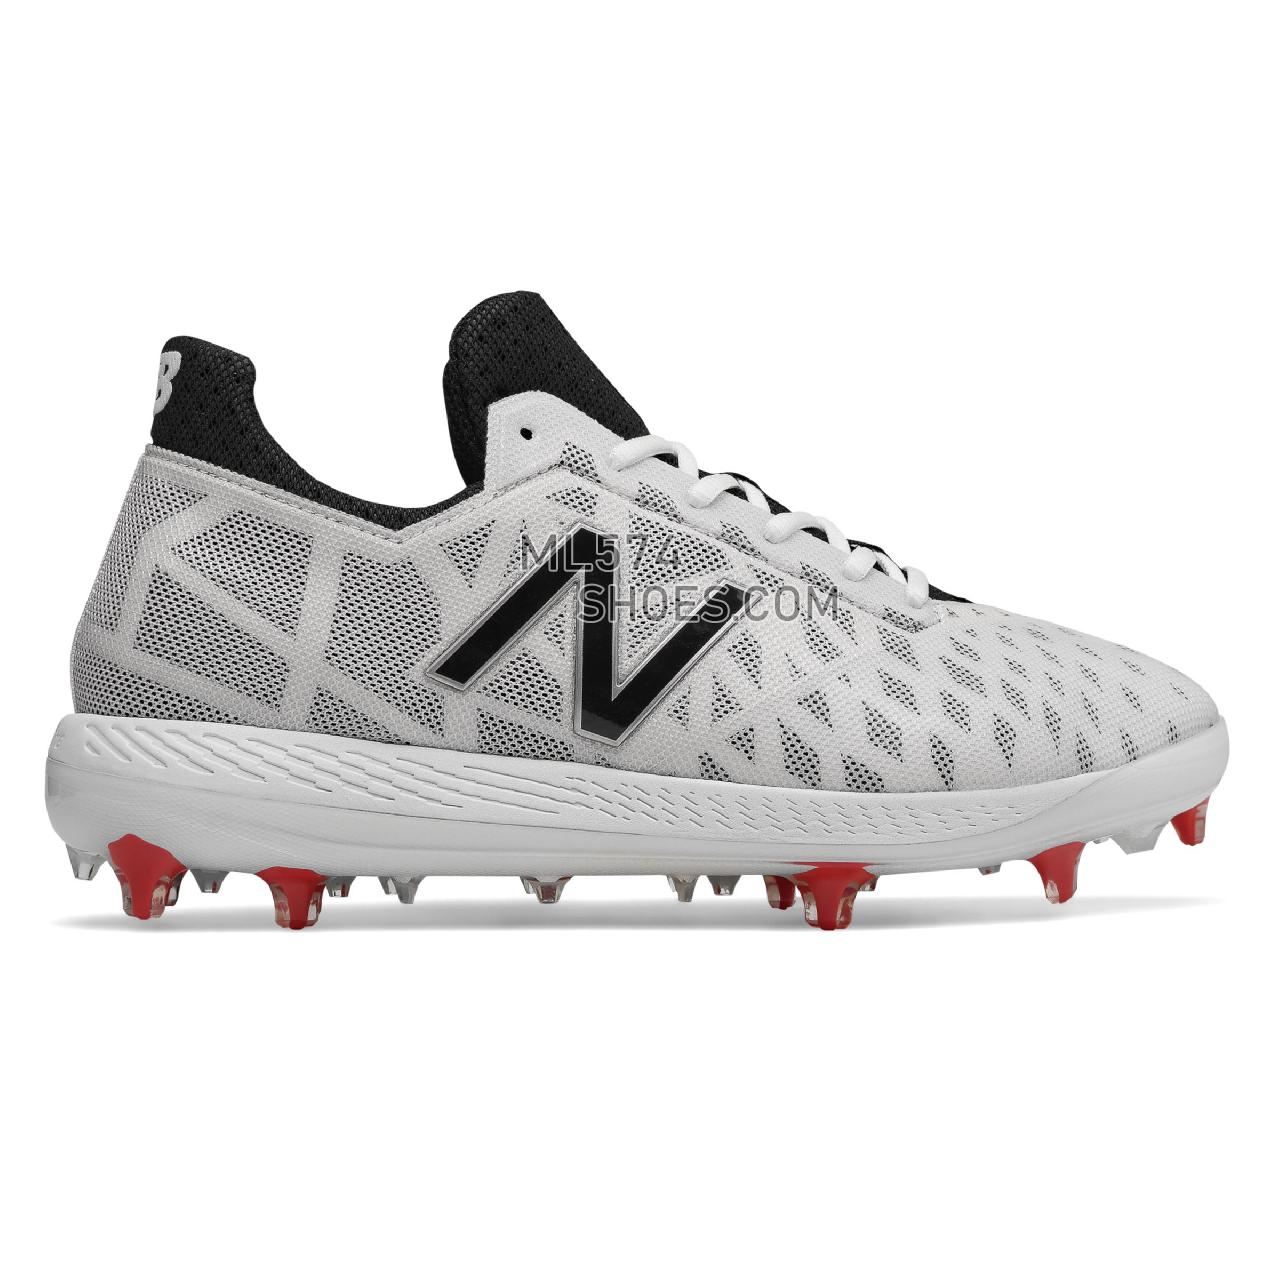 New Balance COMPv1 - Men's 1 - Baseball White with Black and Red - COMPTW1